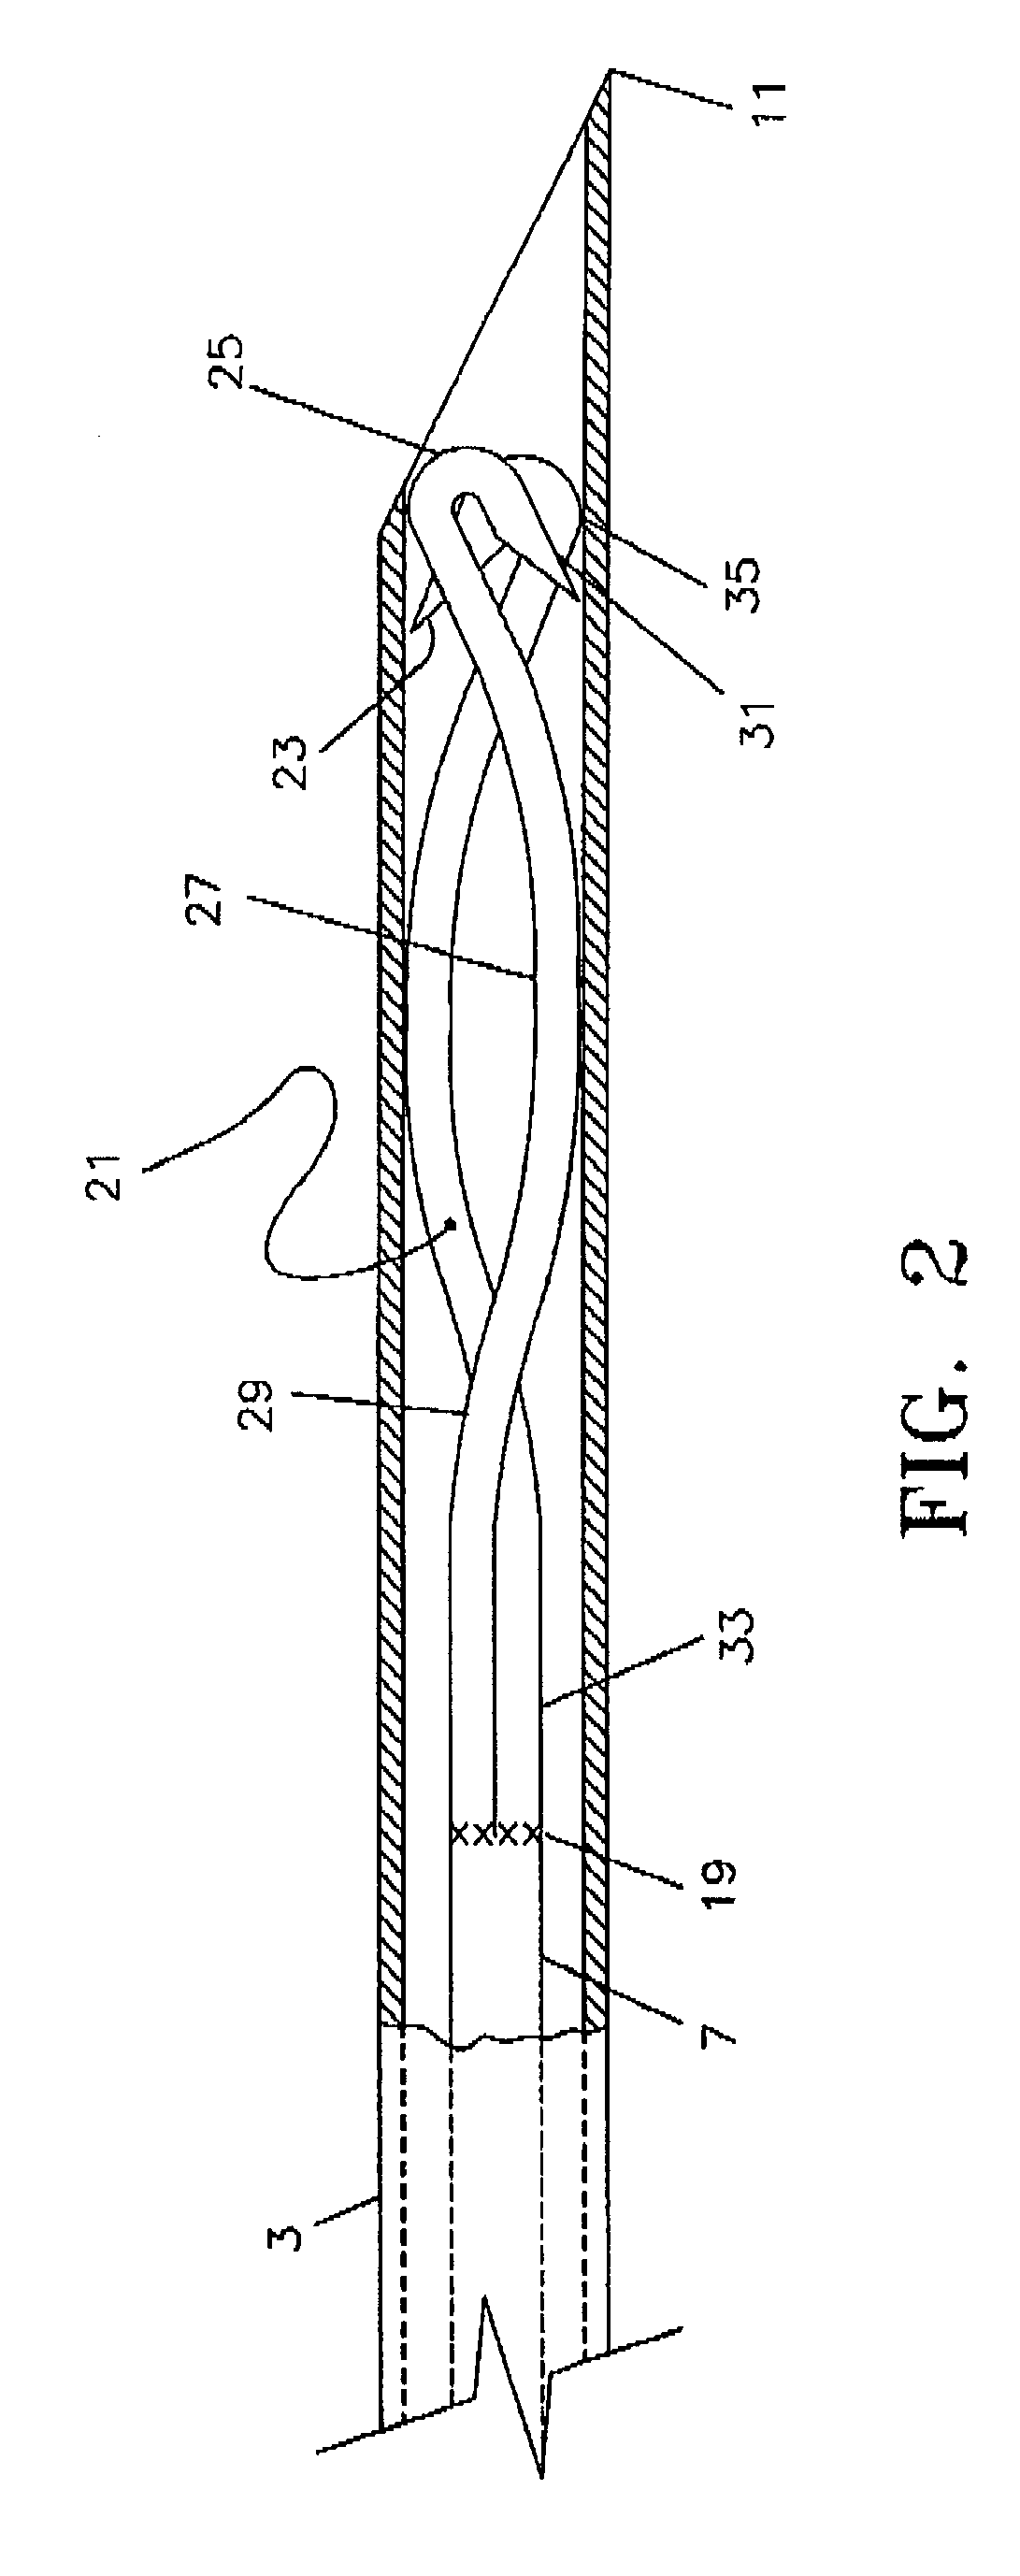 Device and method for withdrawing a tubular body part